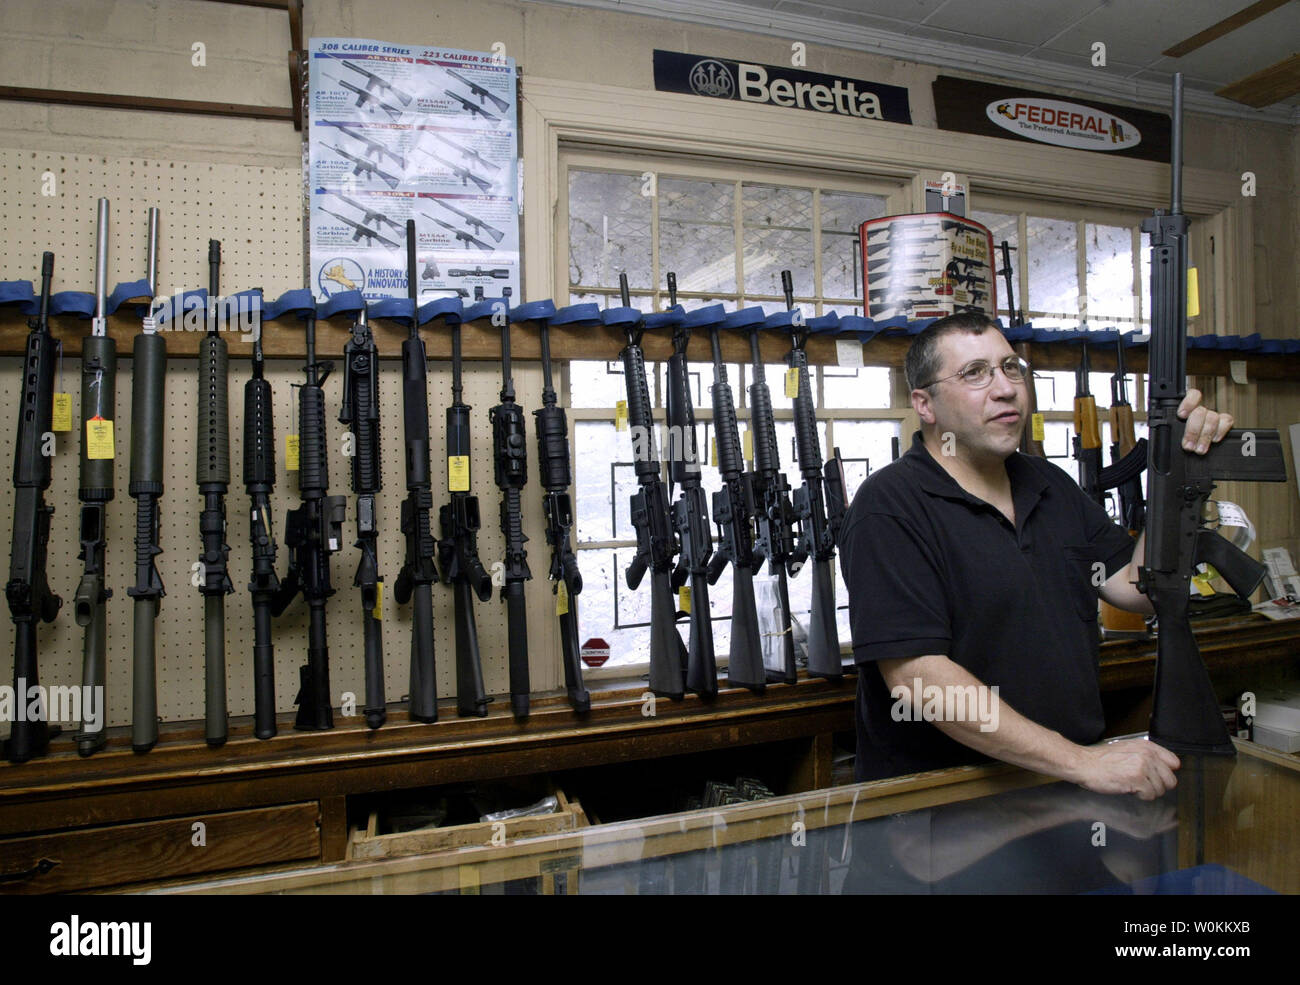 A salesman demonstrates the Cold Match target gun at the Potomac Arms gun store in Alexandria, Virginia in a September 10, 2004 file photo. In the aftermath of the deadly Virginia Tech University rampage, in which 33 people were shot by student Cho Seung-Hui, many are raising questions about lax gun controls in the United States. (UPI Photo/Yuri Gripas/Files) Stock Photo